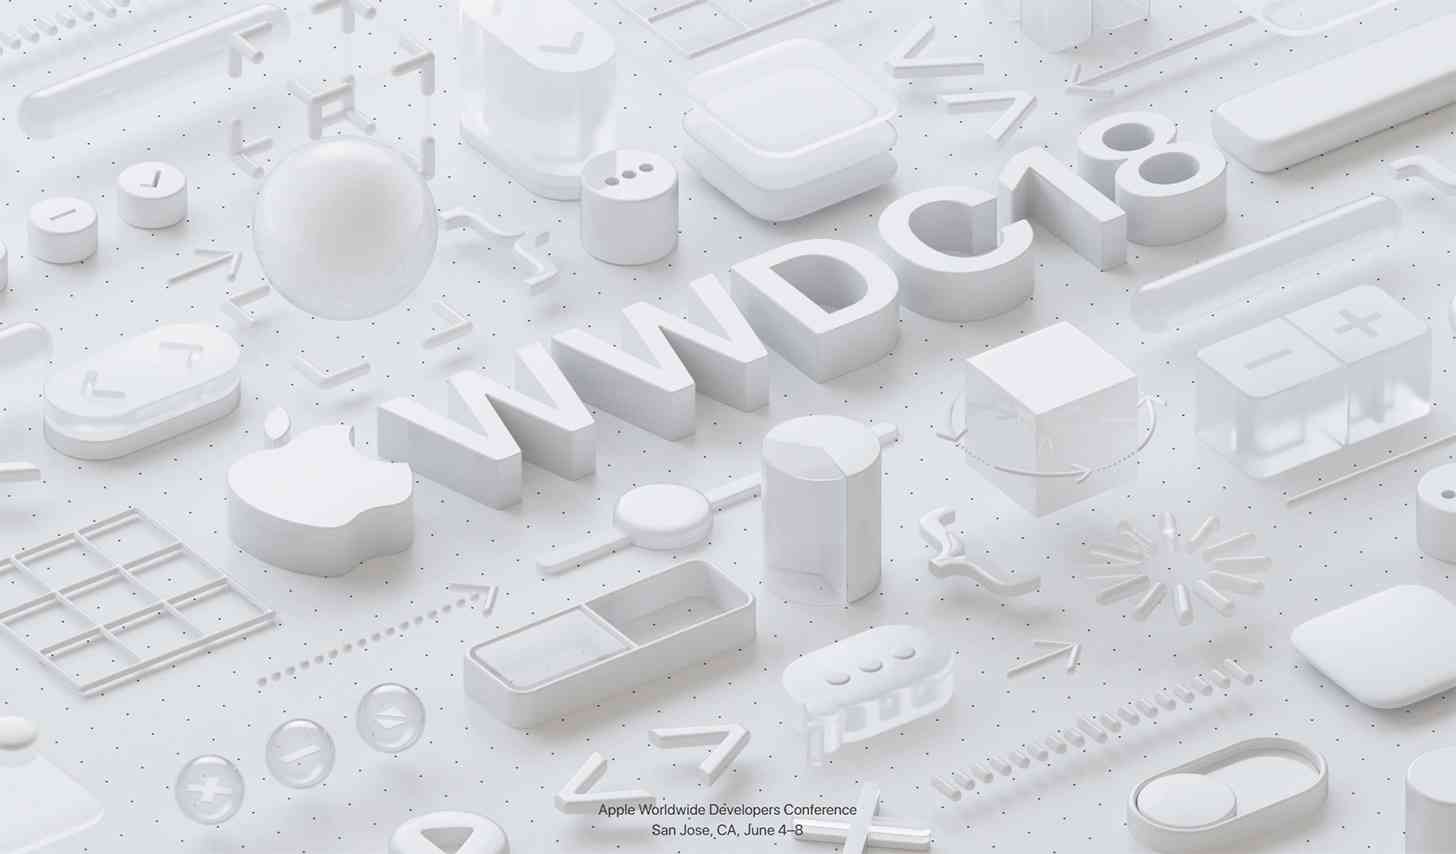 Apple WWDC 2018 official dates